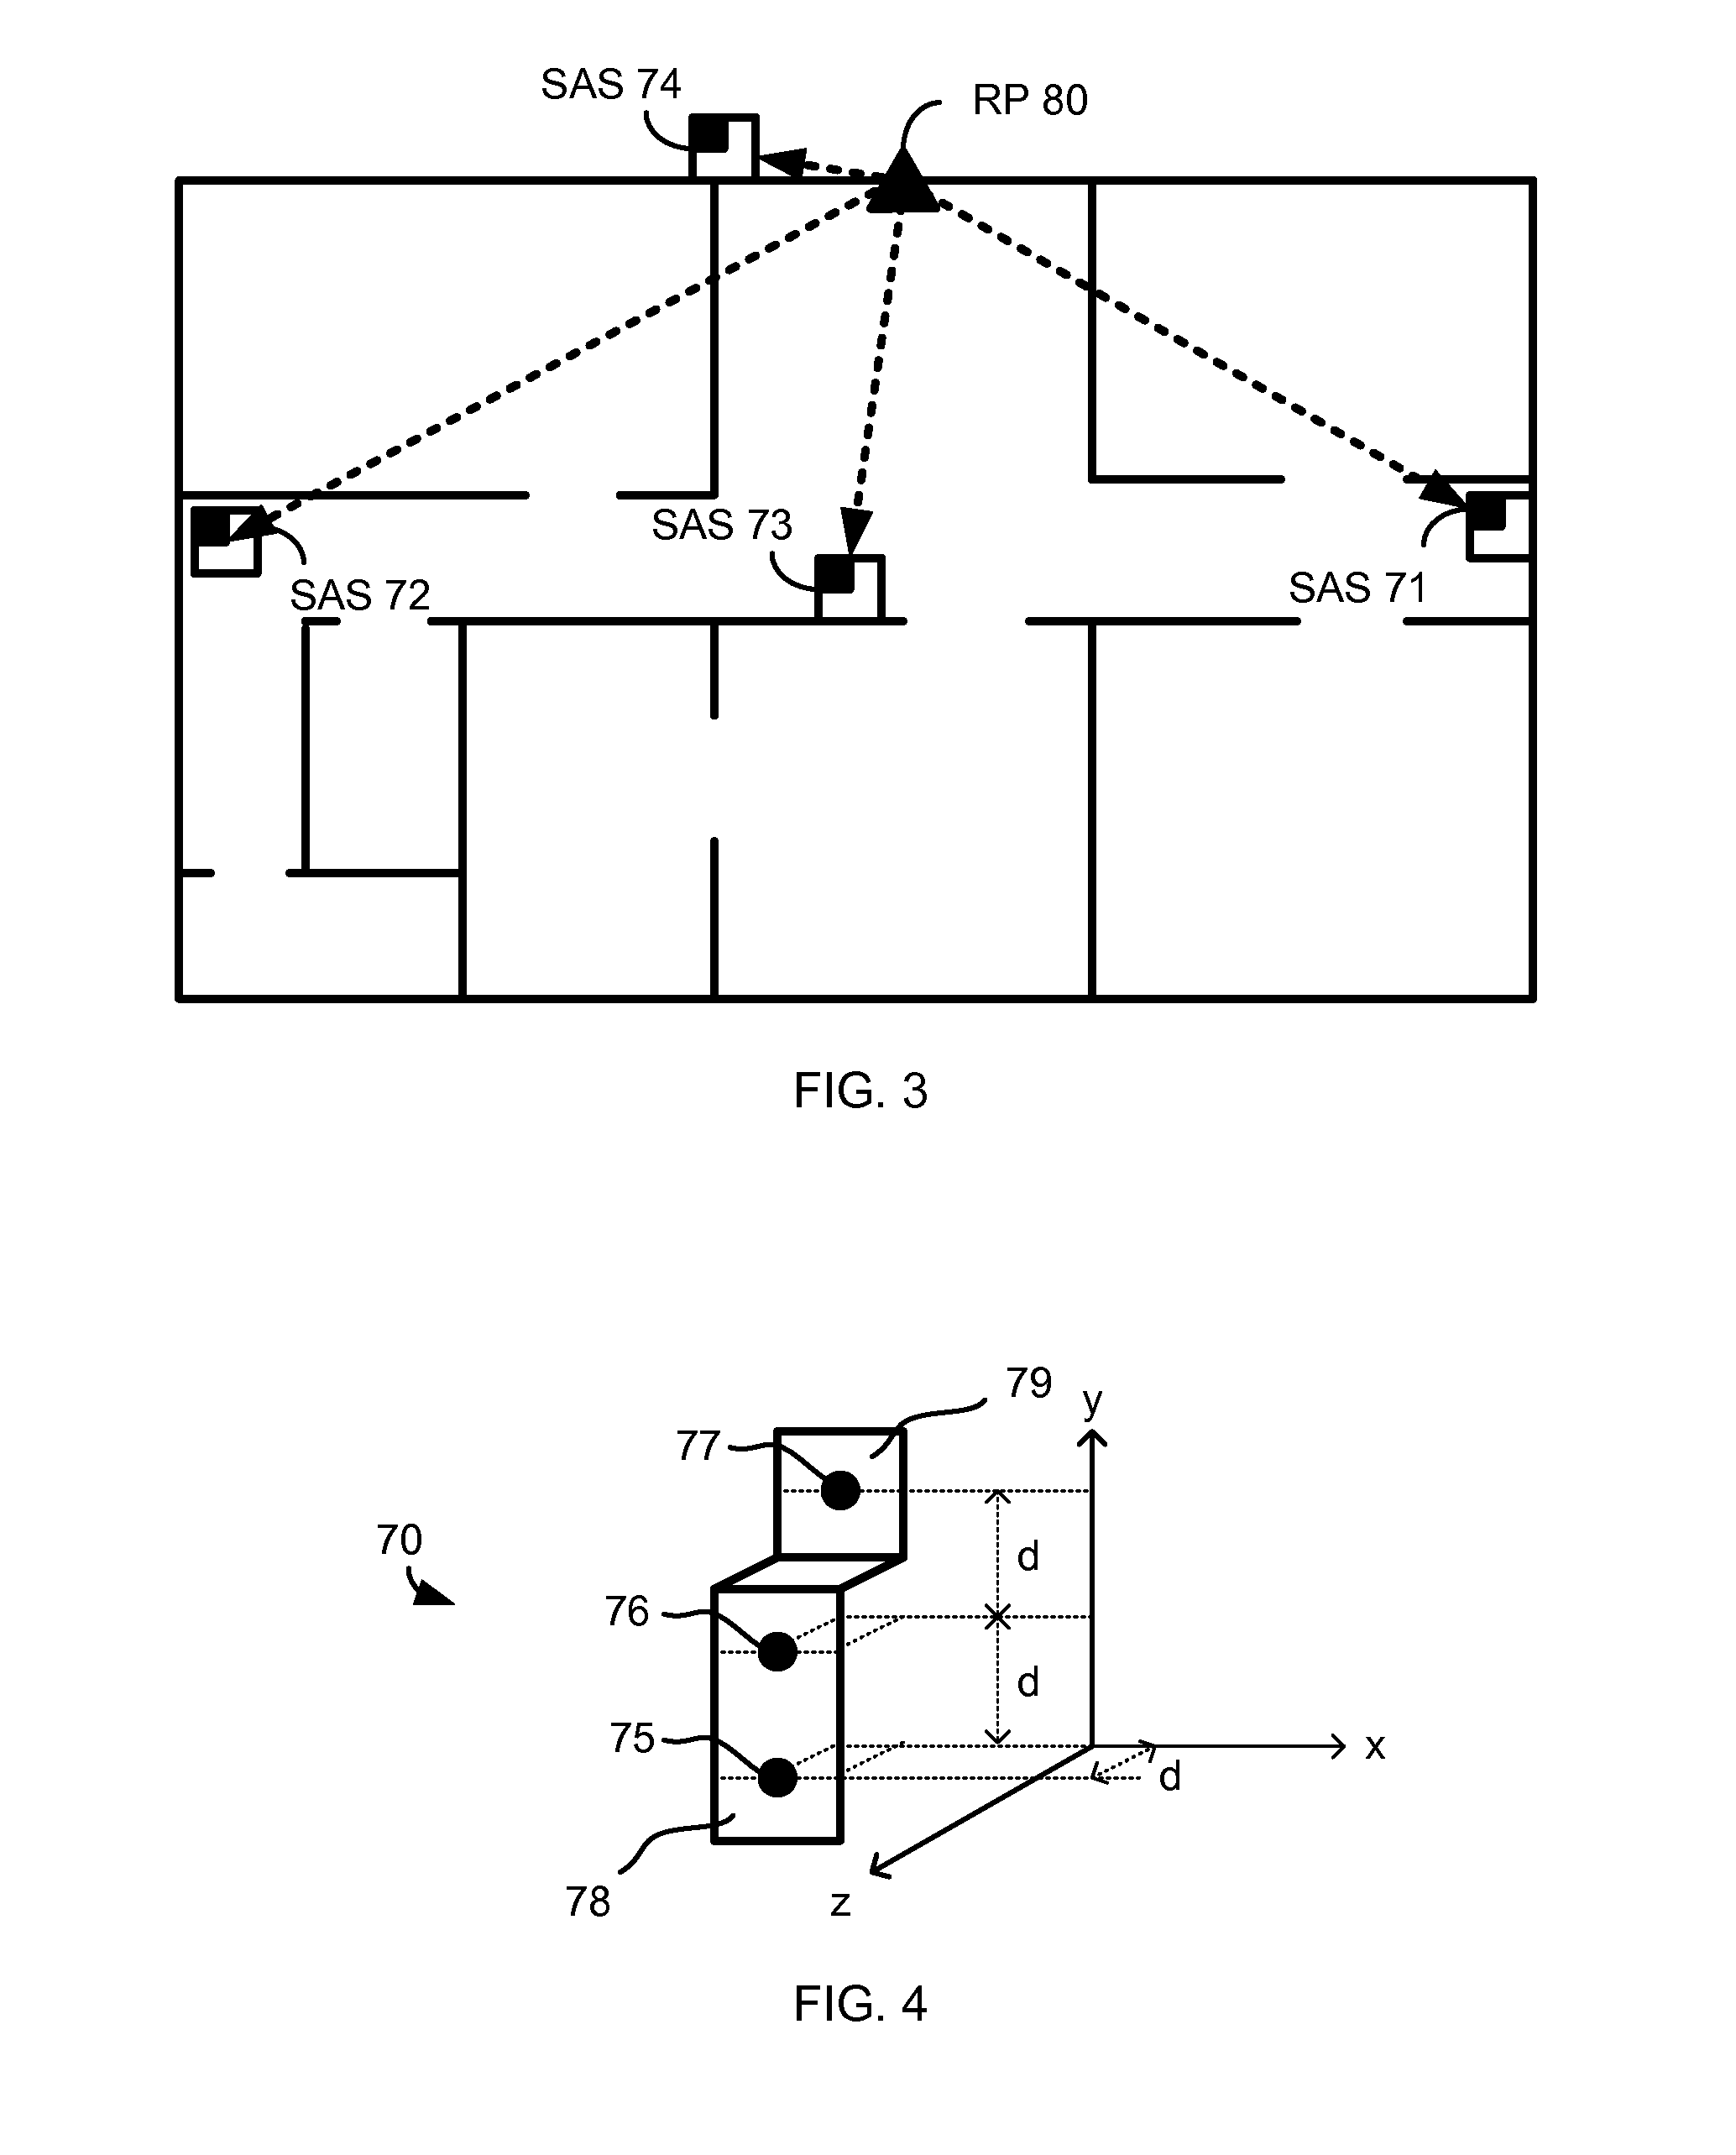 Camera-based position location and navigation based on image processing